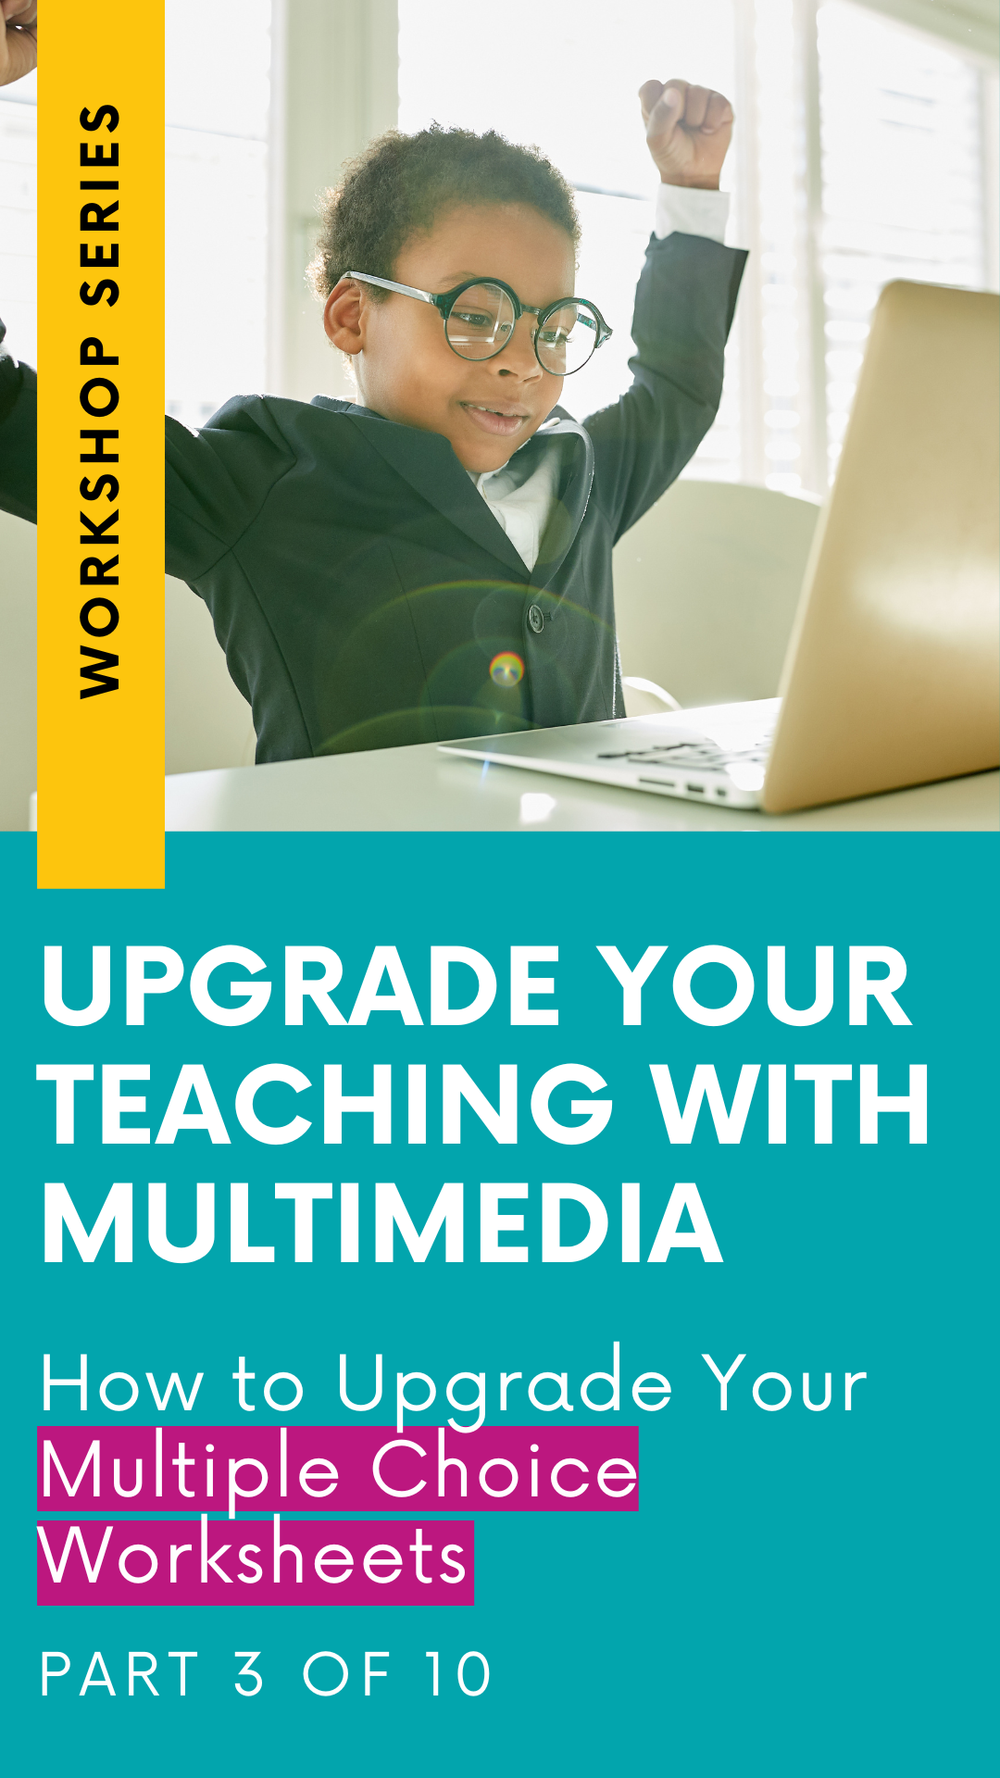 Upgrade Your Multiple Choice Worksheets! (From the Upgrade Your Teaching with Multimedia Workshop Series: Part 3) (Copy)